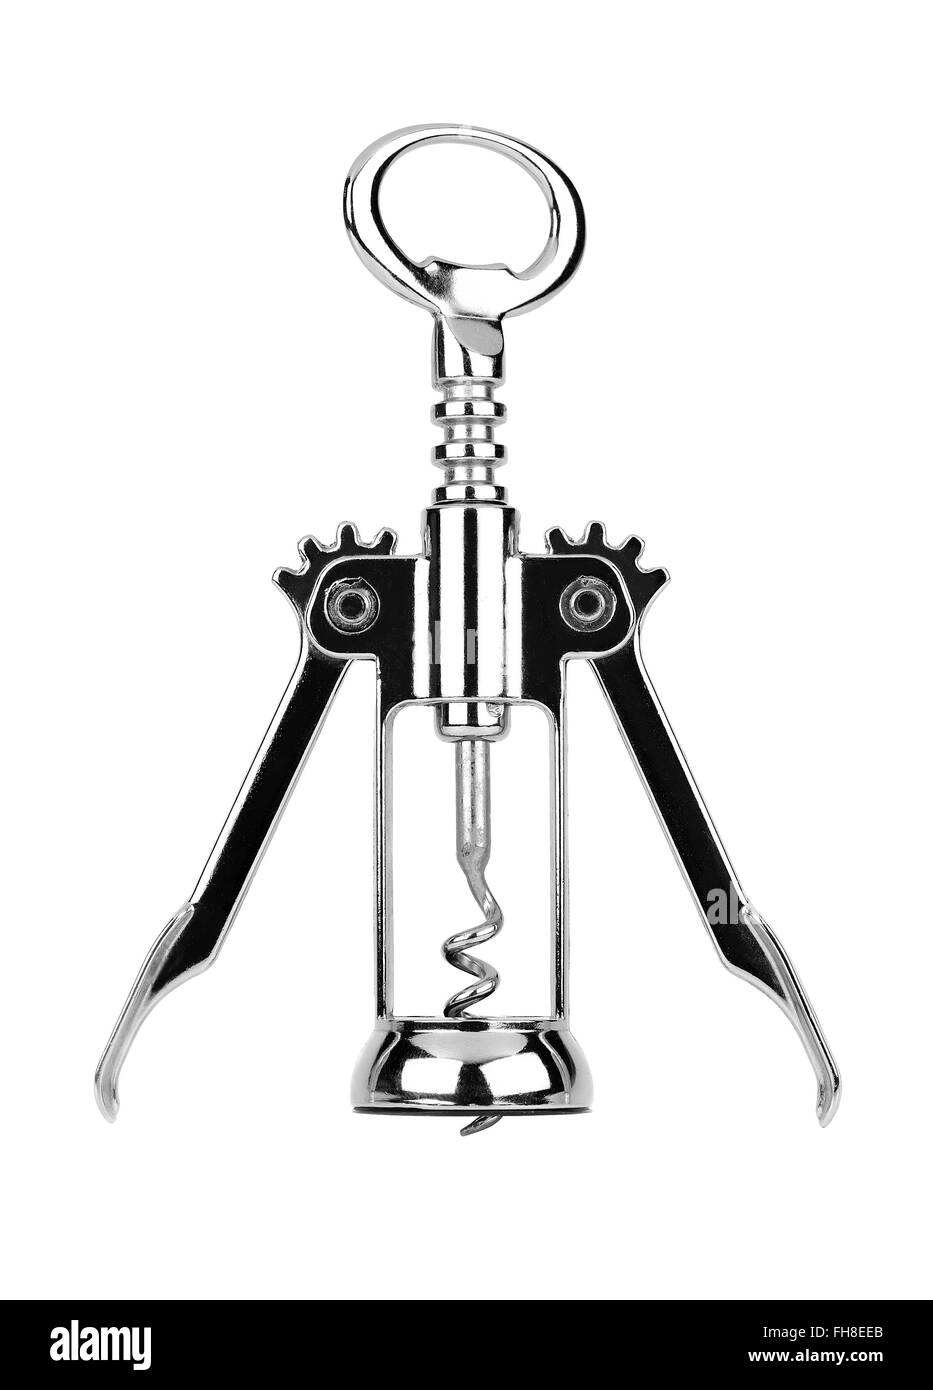 Glossy metal wine bottle opener isolated over the white background, mechanical corkscrew Stock Photo